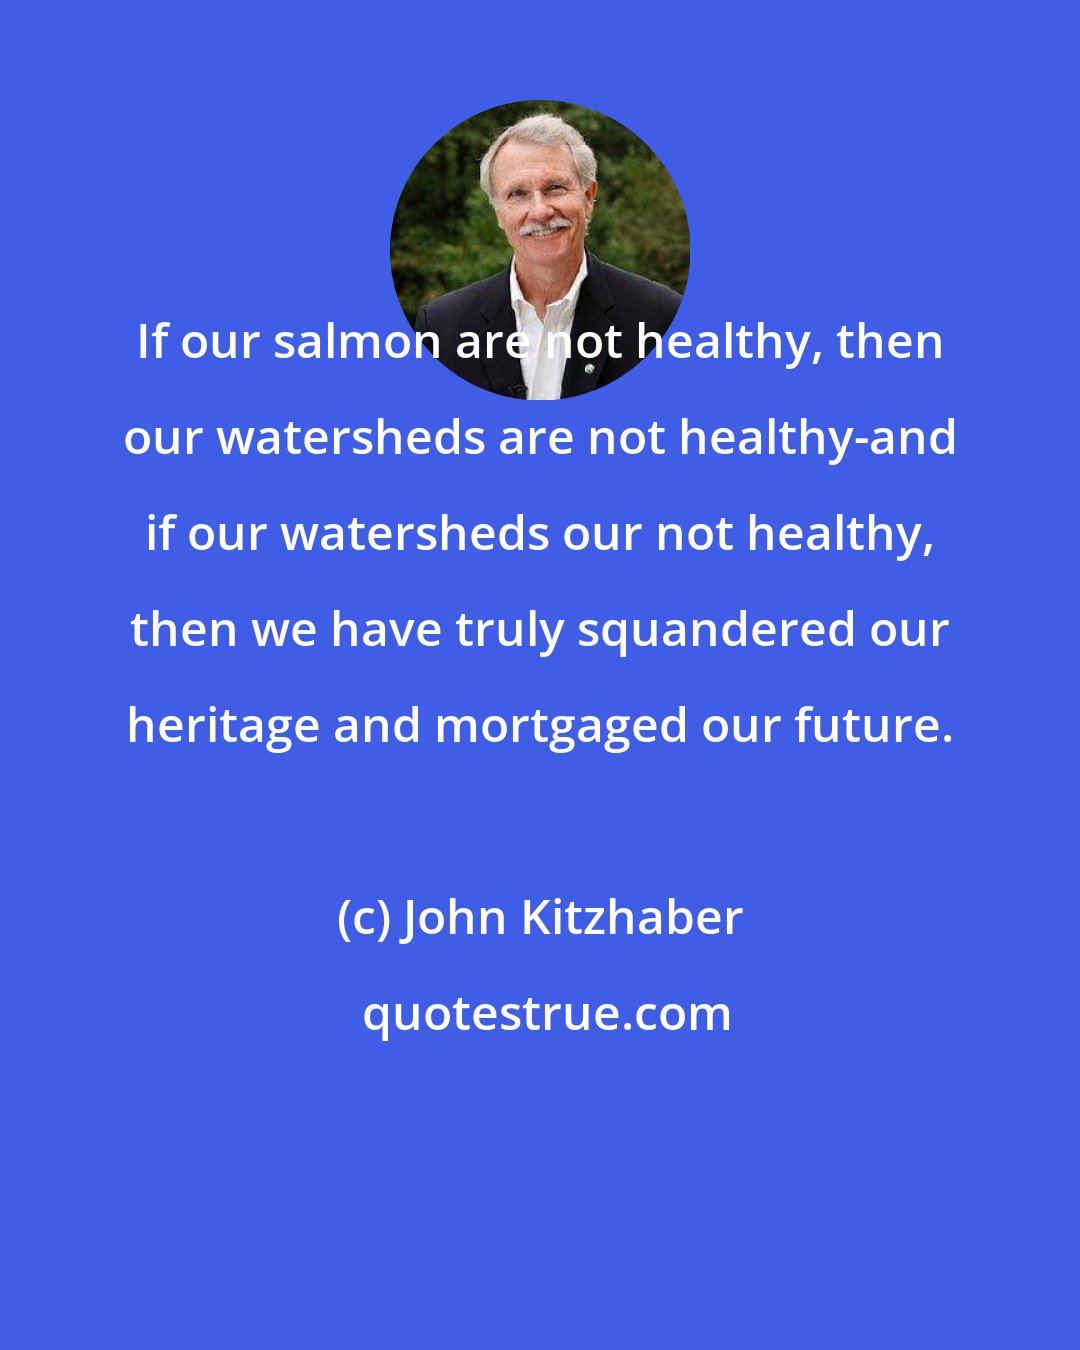 John Kitzhaber: If our salmon are not healthy, then our watersheds are not healthy-and if our watersheds our not healthy, then we have truly squandered our heritage and mortgaged our future.